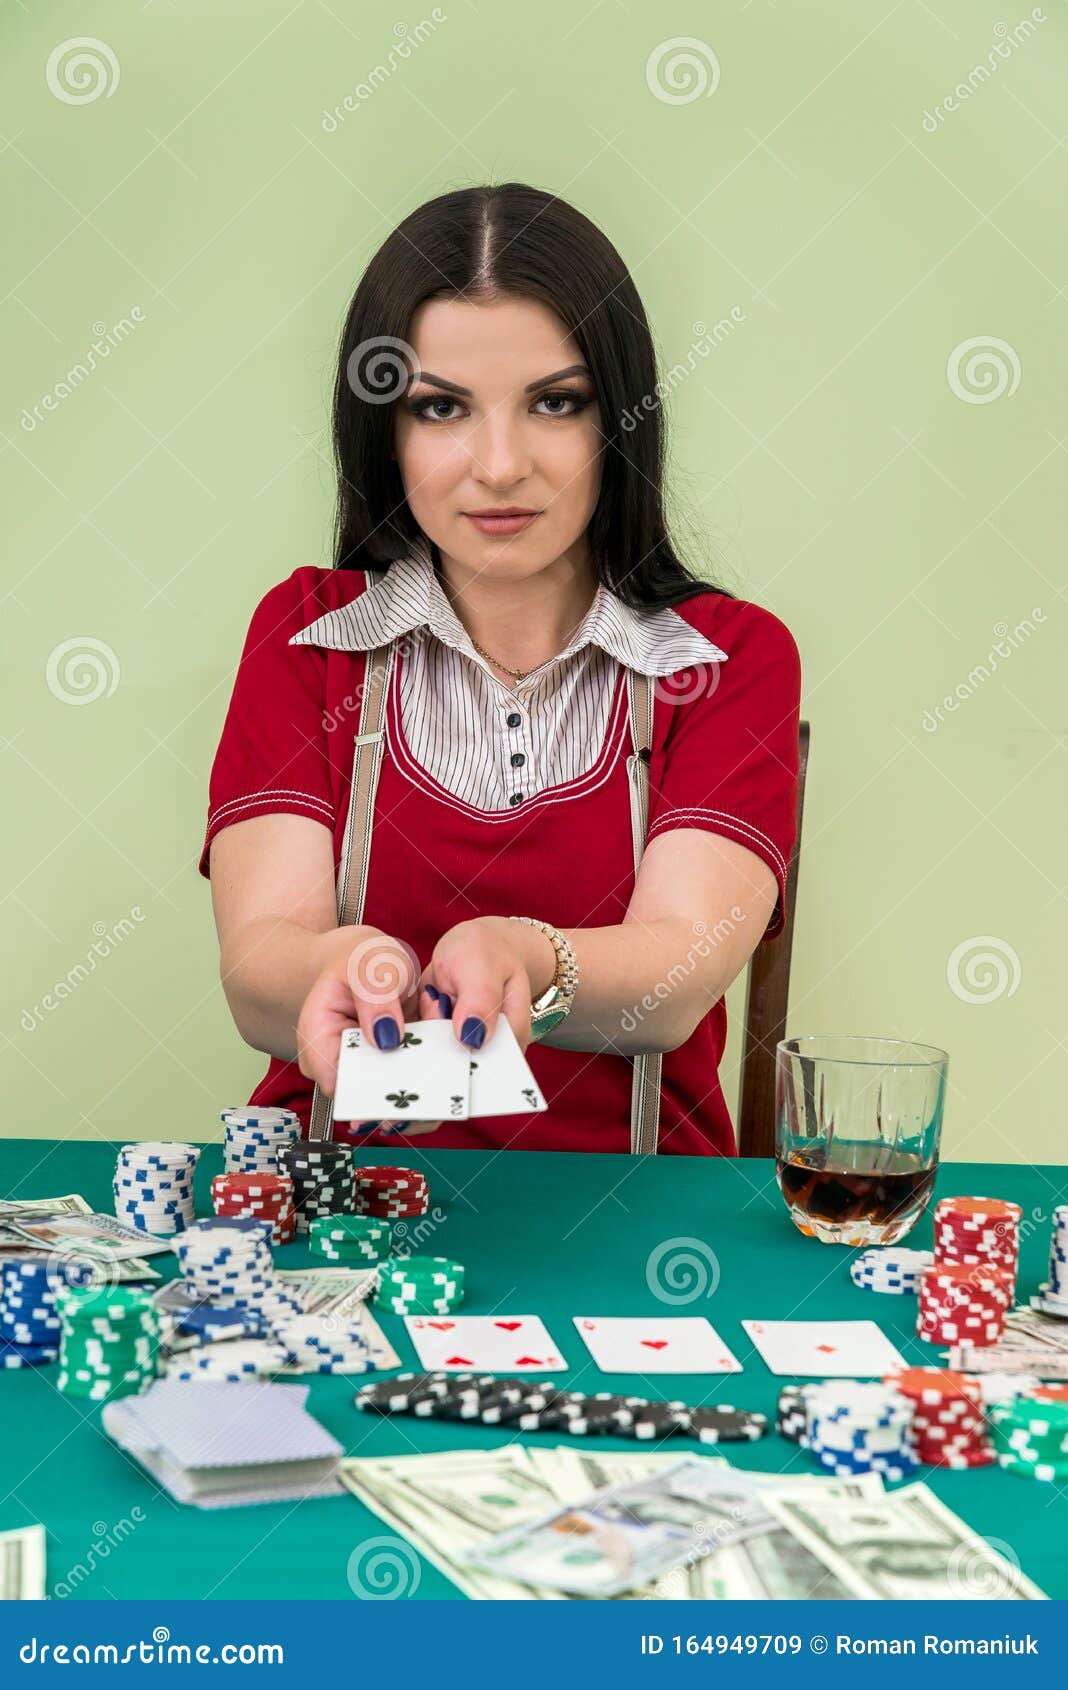 Beautiful Brunette Lady Showing Cards in Casino Stock Image - Image of ...